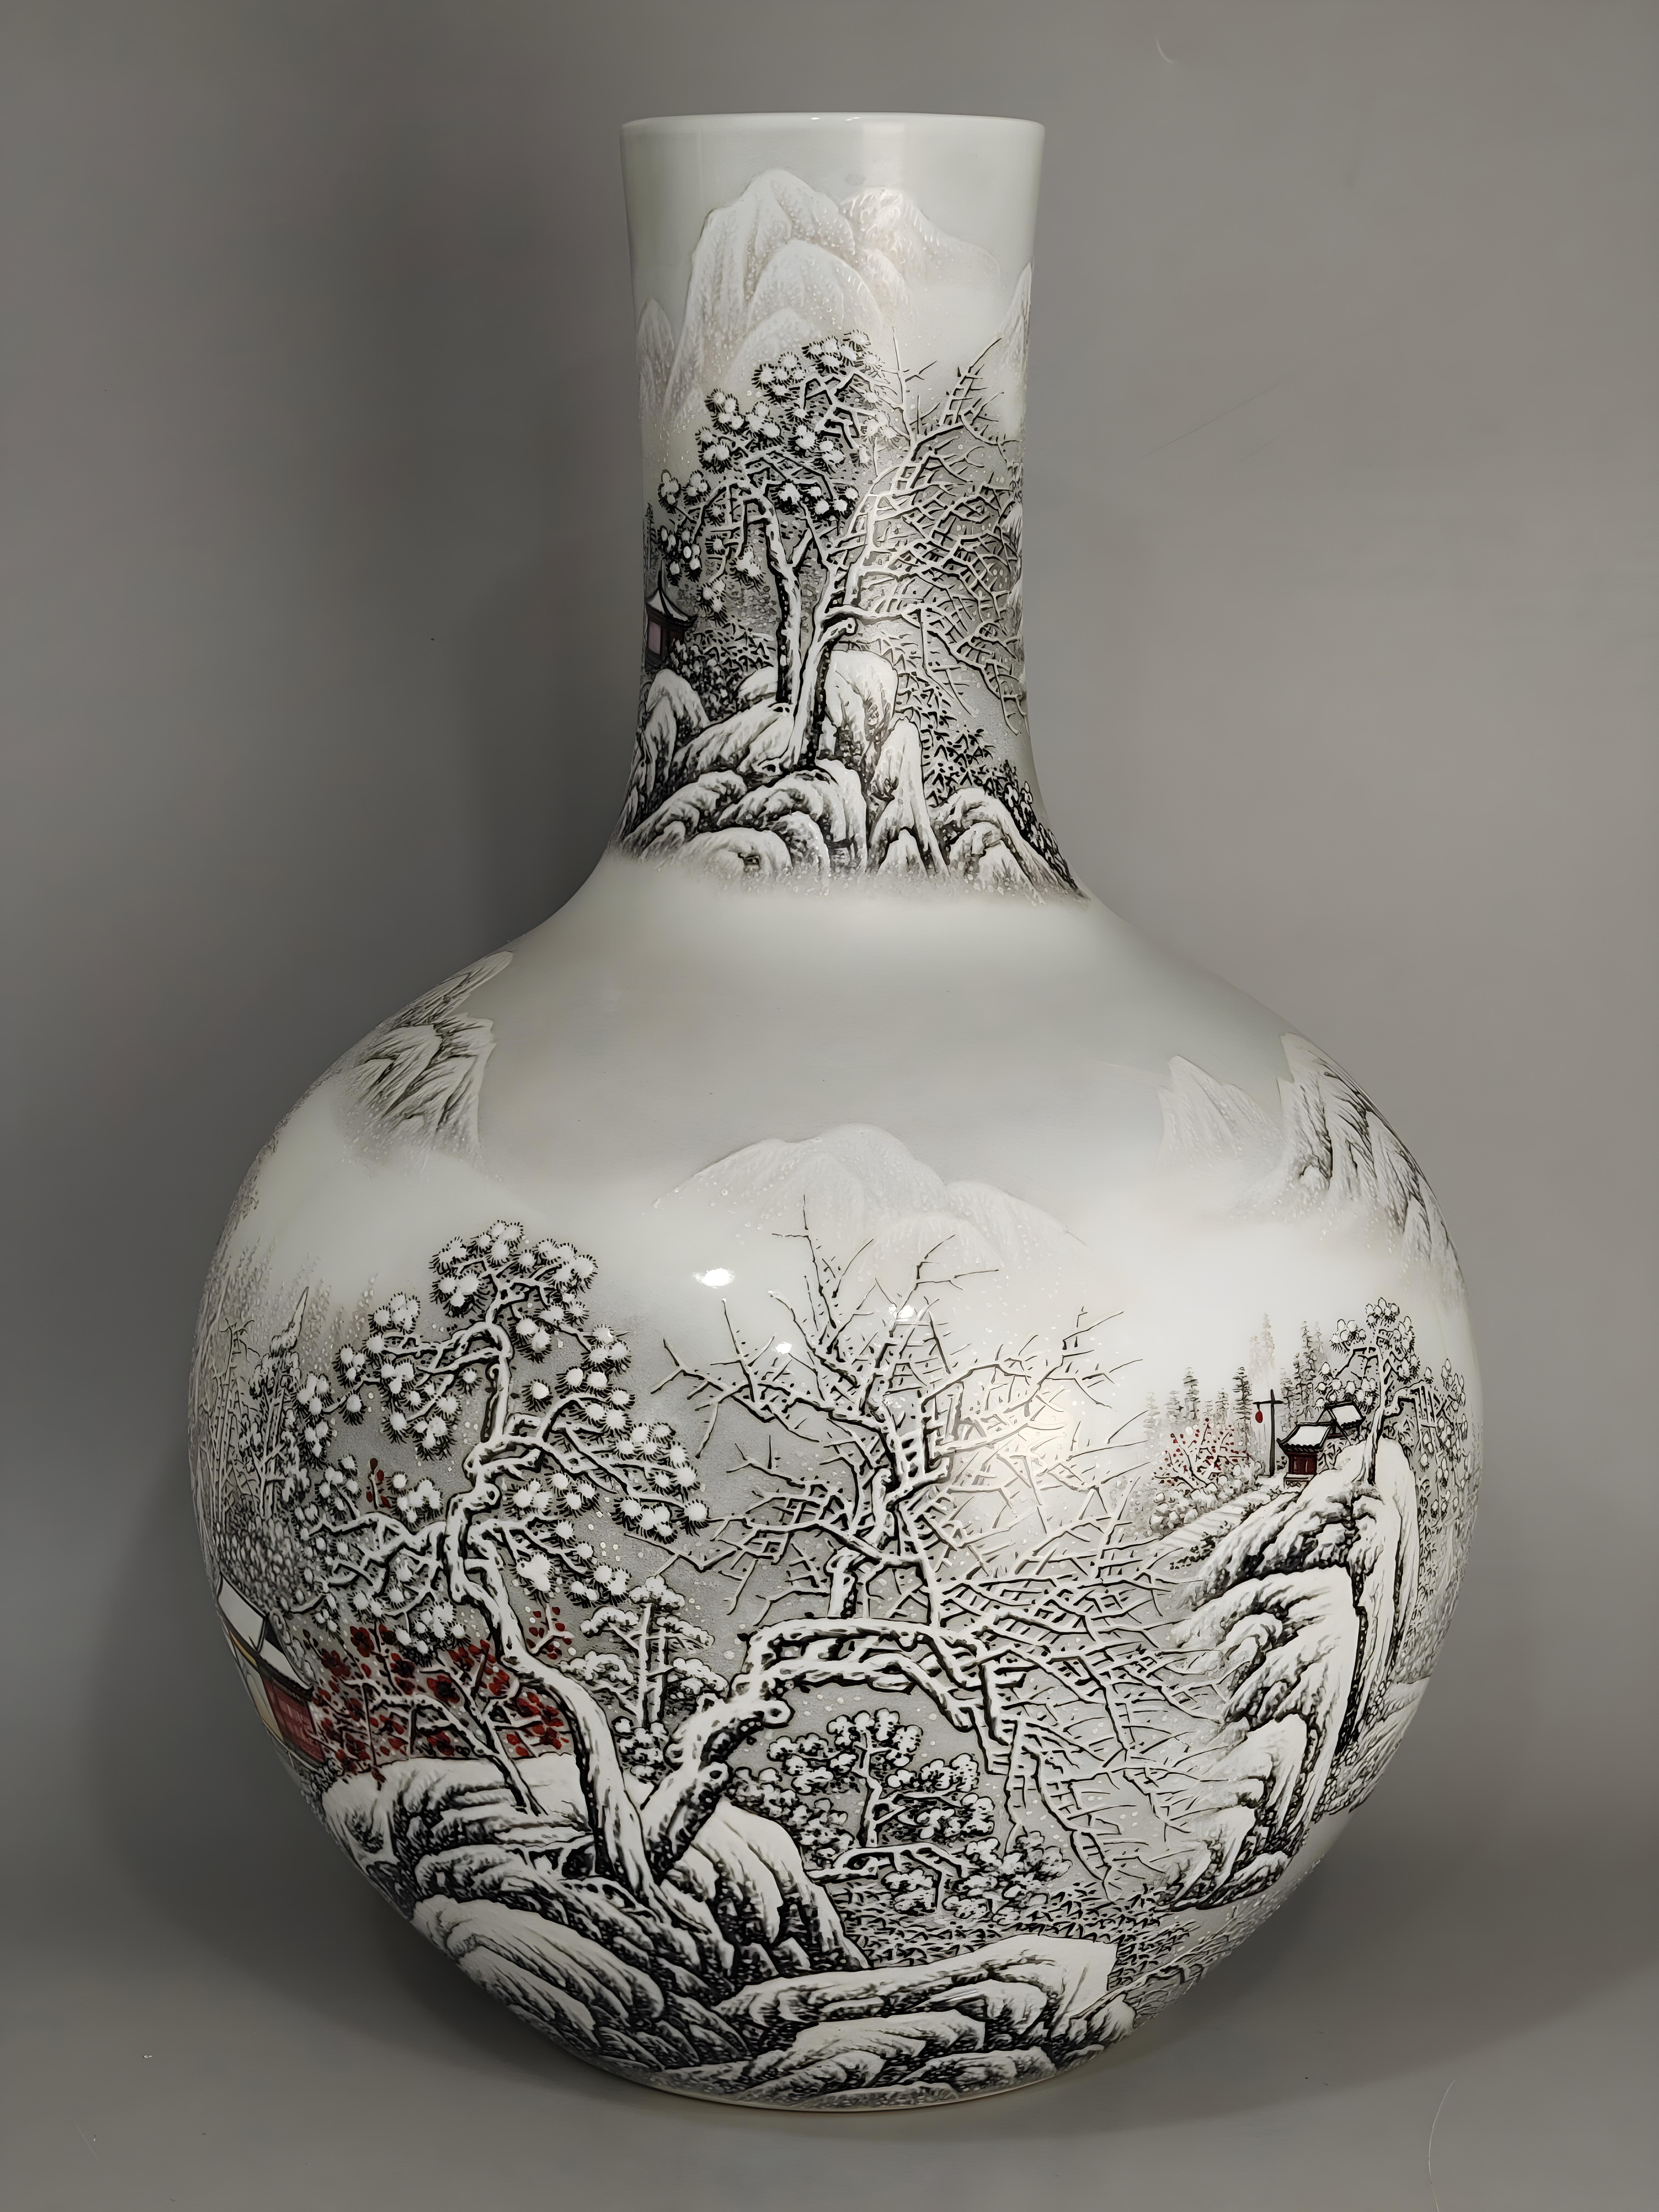 A Handmade Snowing Landscape Porcelain Vase from China, specifically Jingdezhen, refers to a vase crafted in Jingdezhen, a renowned center for porcelain production in China. This vase features a snowing landscape design, showcasing a winter scene on